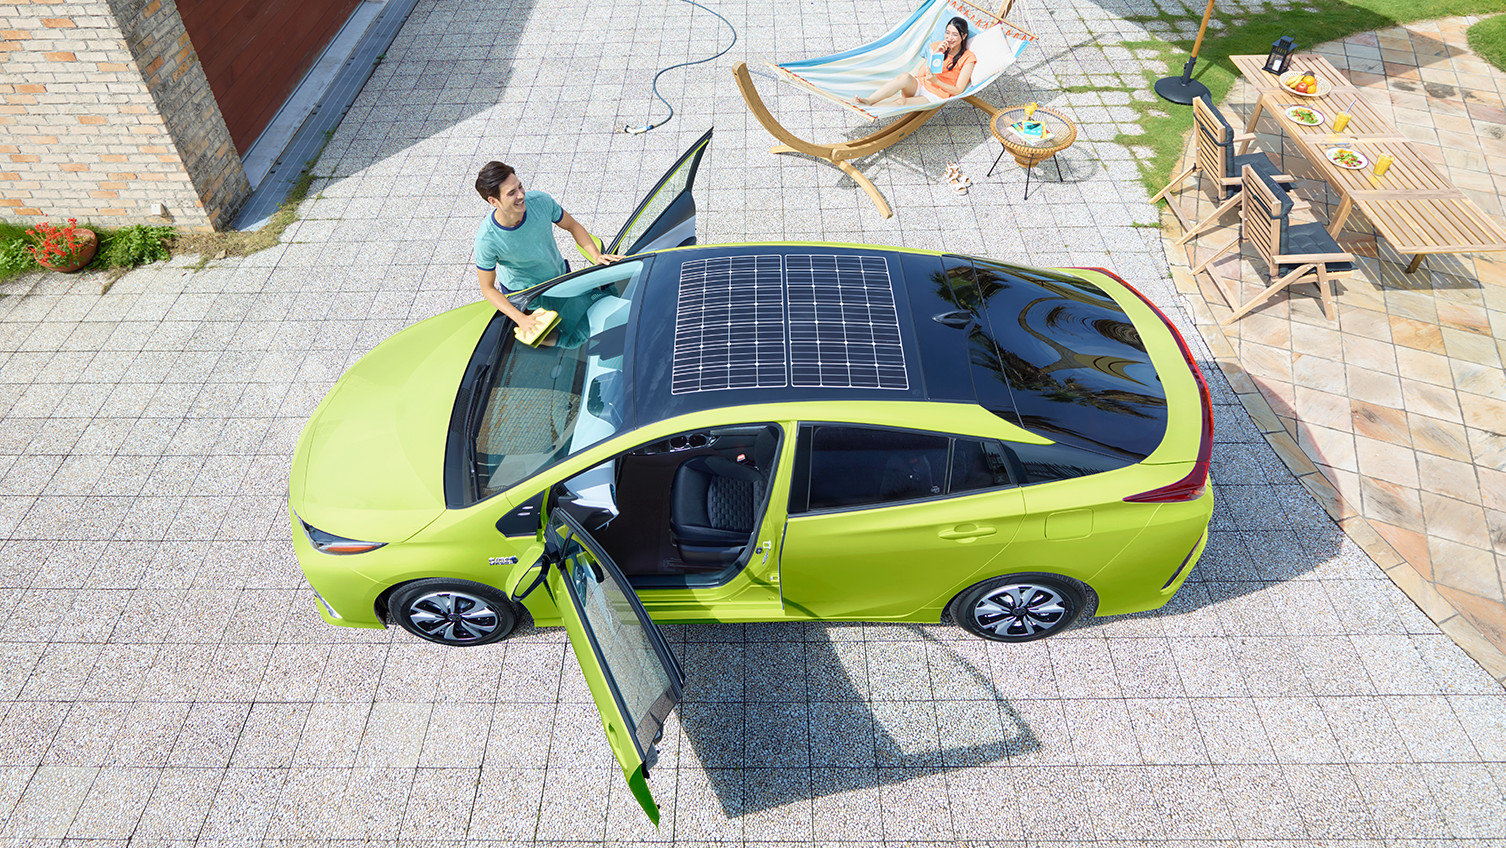 Toyota debuts new Prius with rooftop PV option in Japan pv magazine